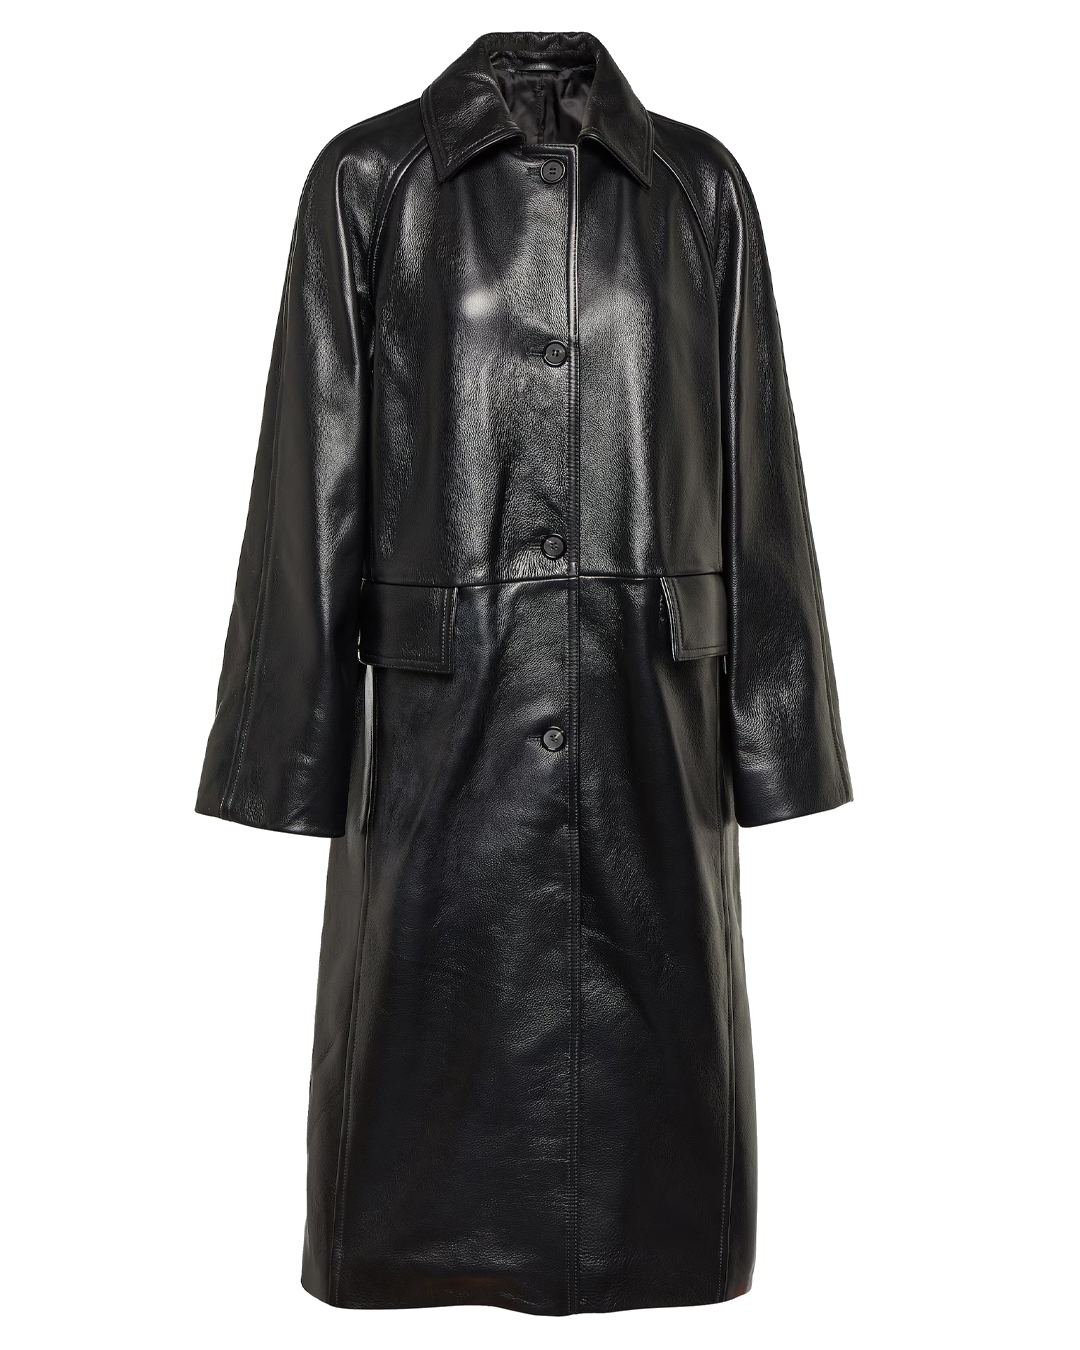 BEST LEATHER COATS